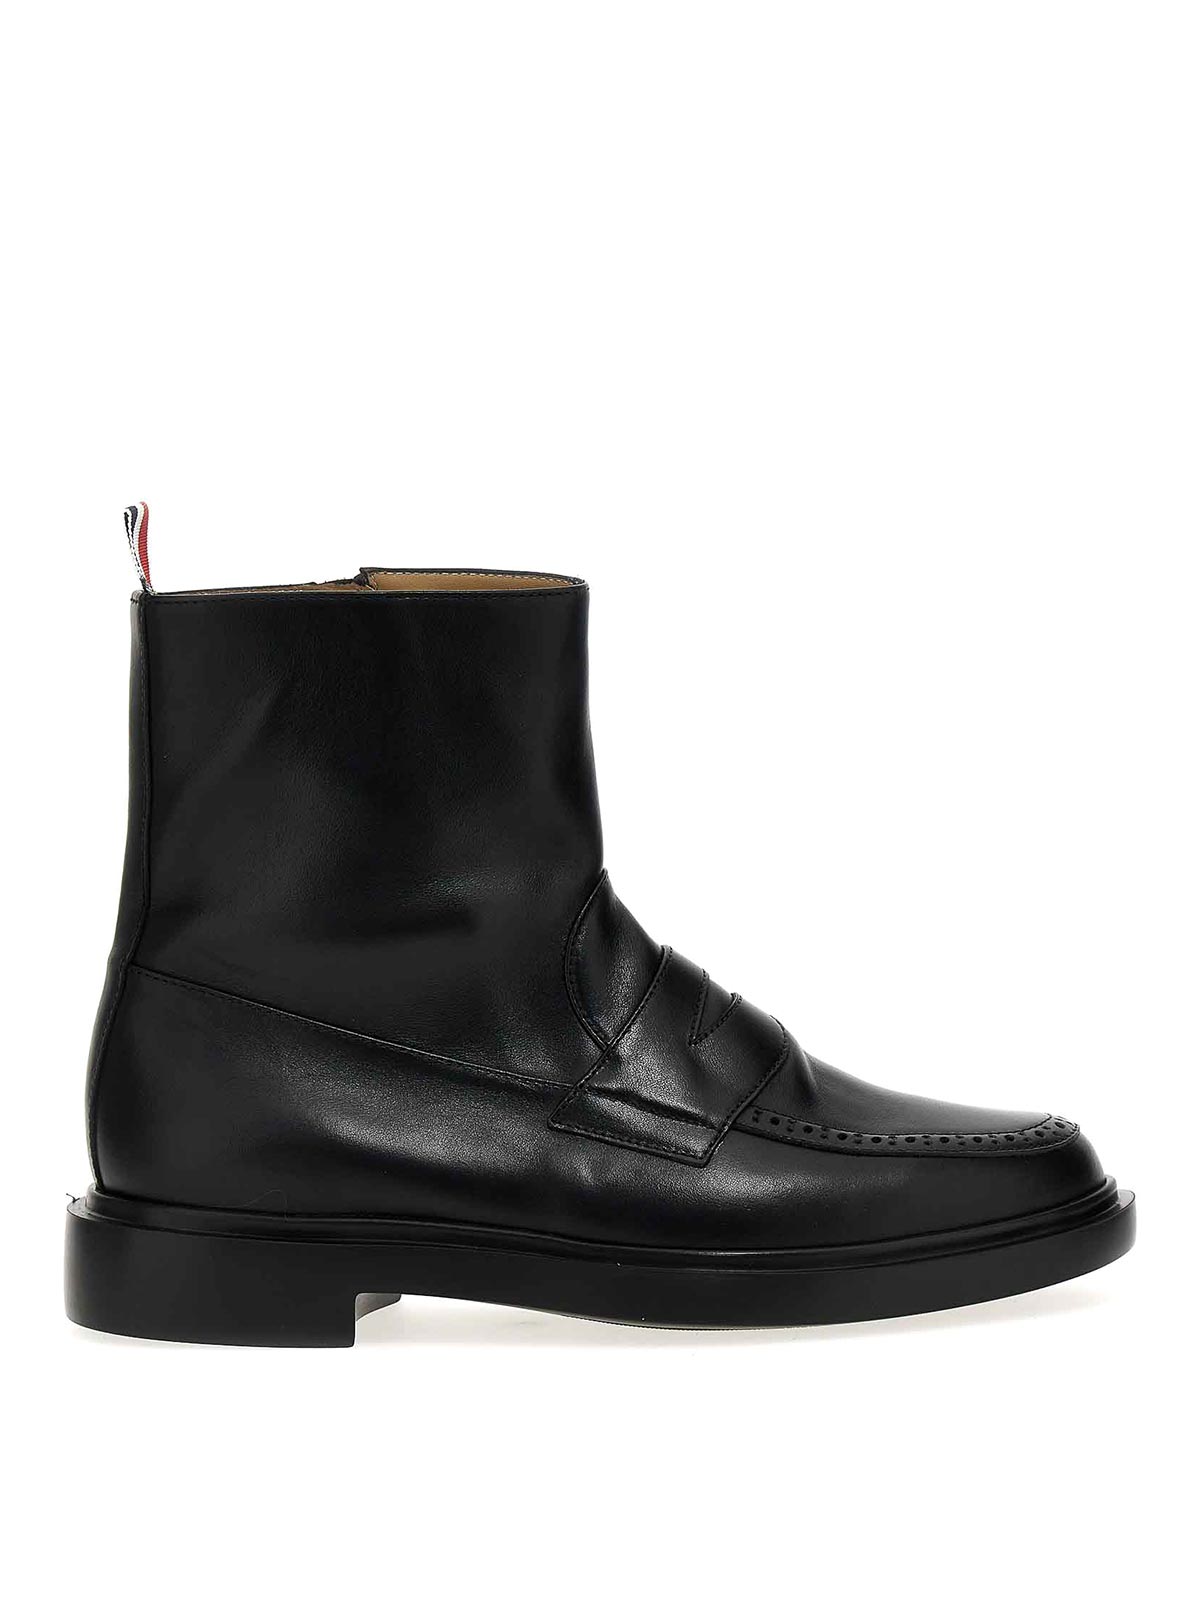 Thom Browne Penny Loafer Ankle Boots In Negro